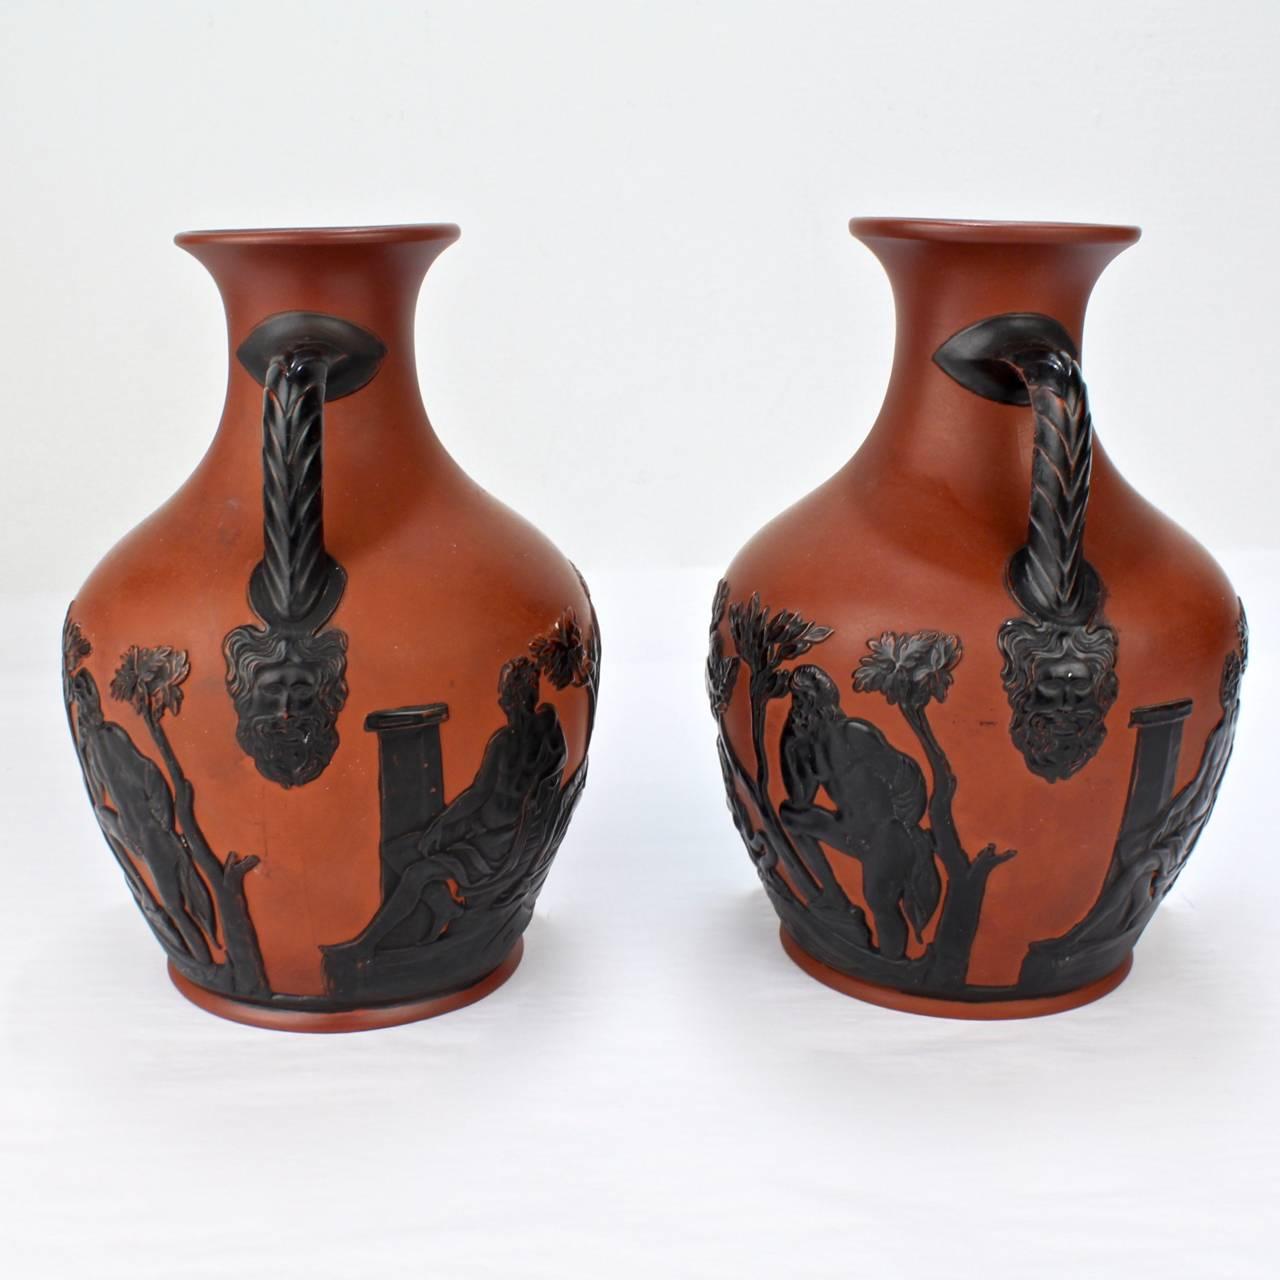 A good pair of Wilhelm Schiller and Son terra cotta or earthenware Portland vase copies in orange and black.

Modeled after Wedgwood's famous copy of the ancient Greek cameo glass vessel known as the Portland vase.

Wilhelm Schiller and Son were